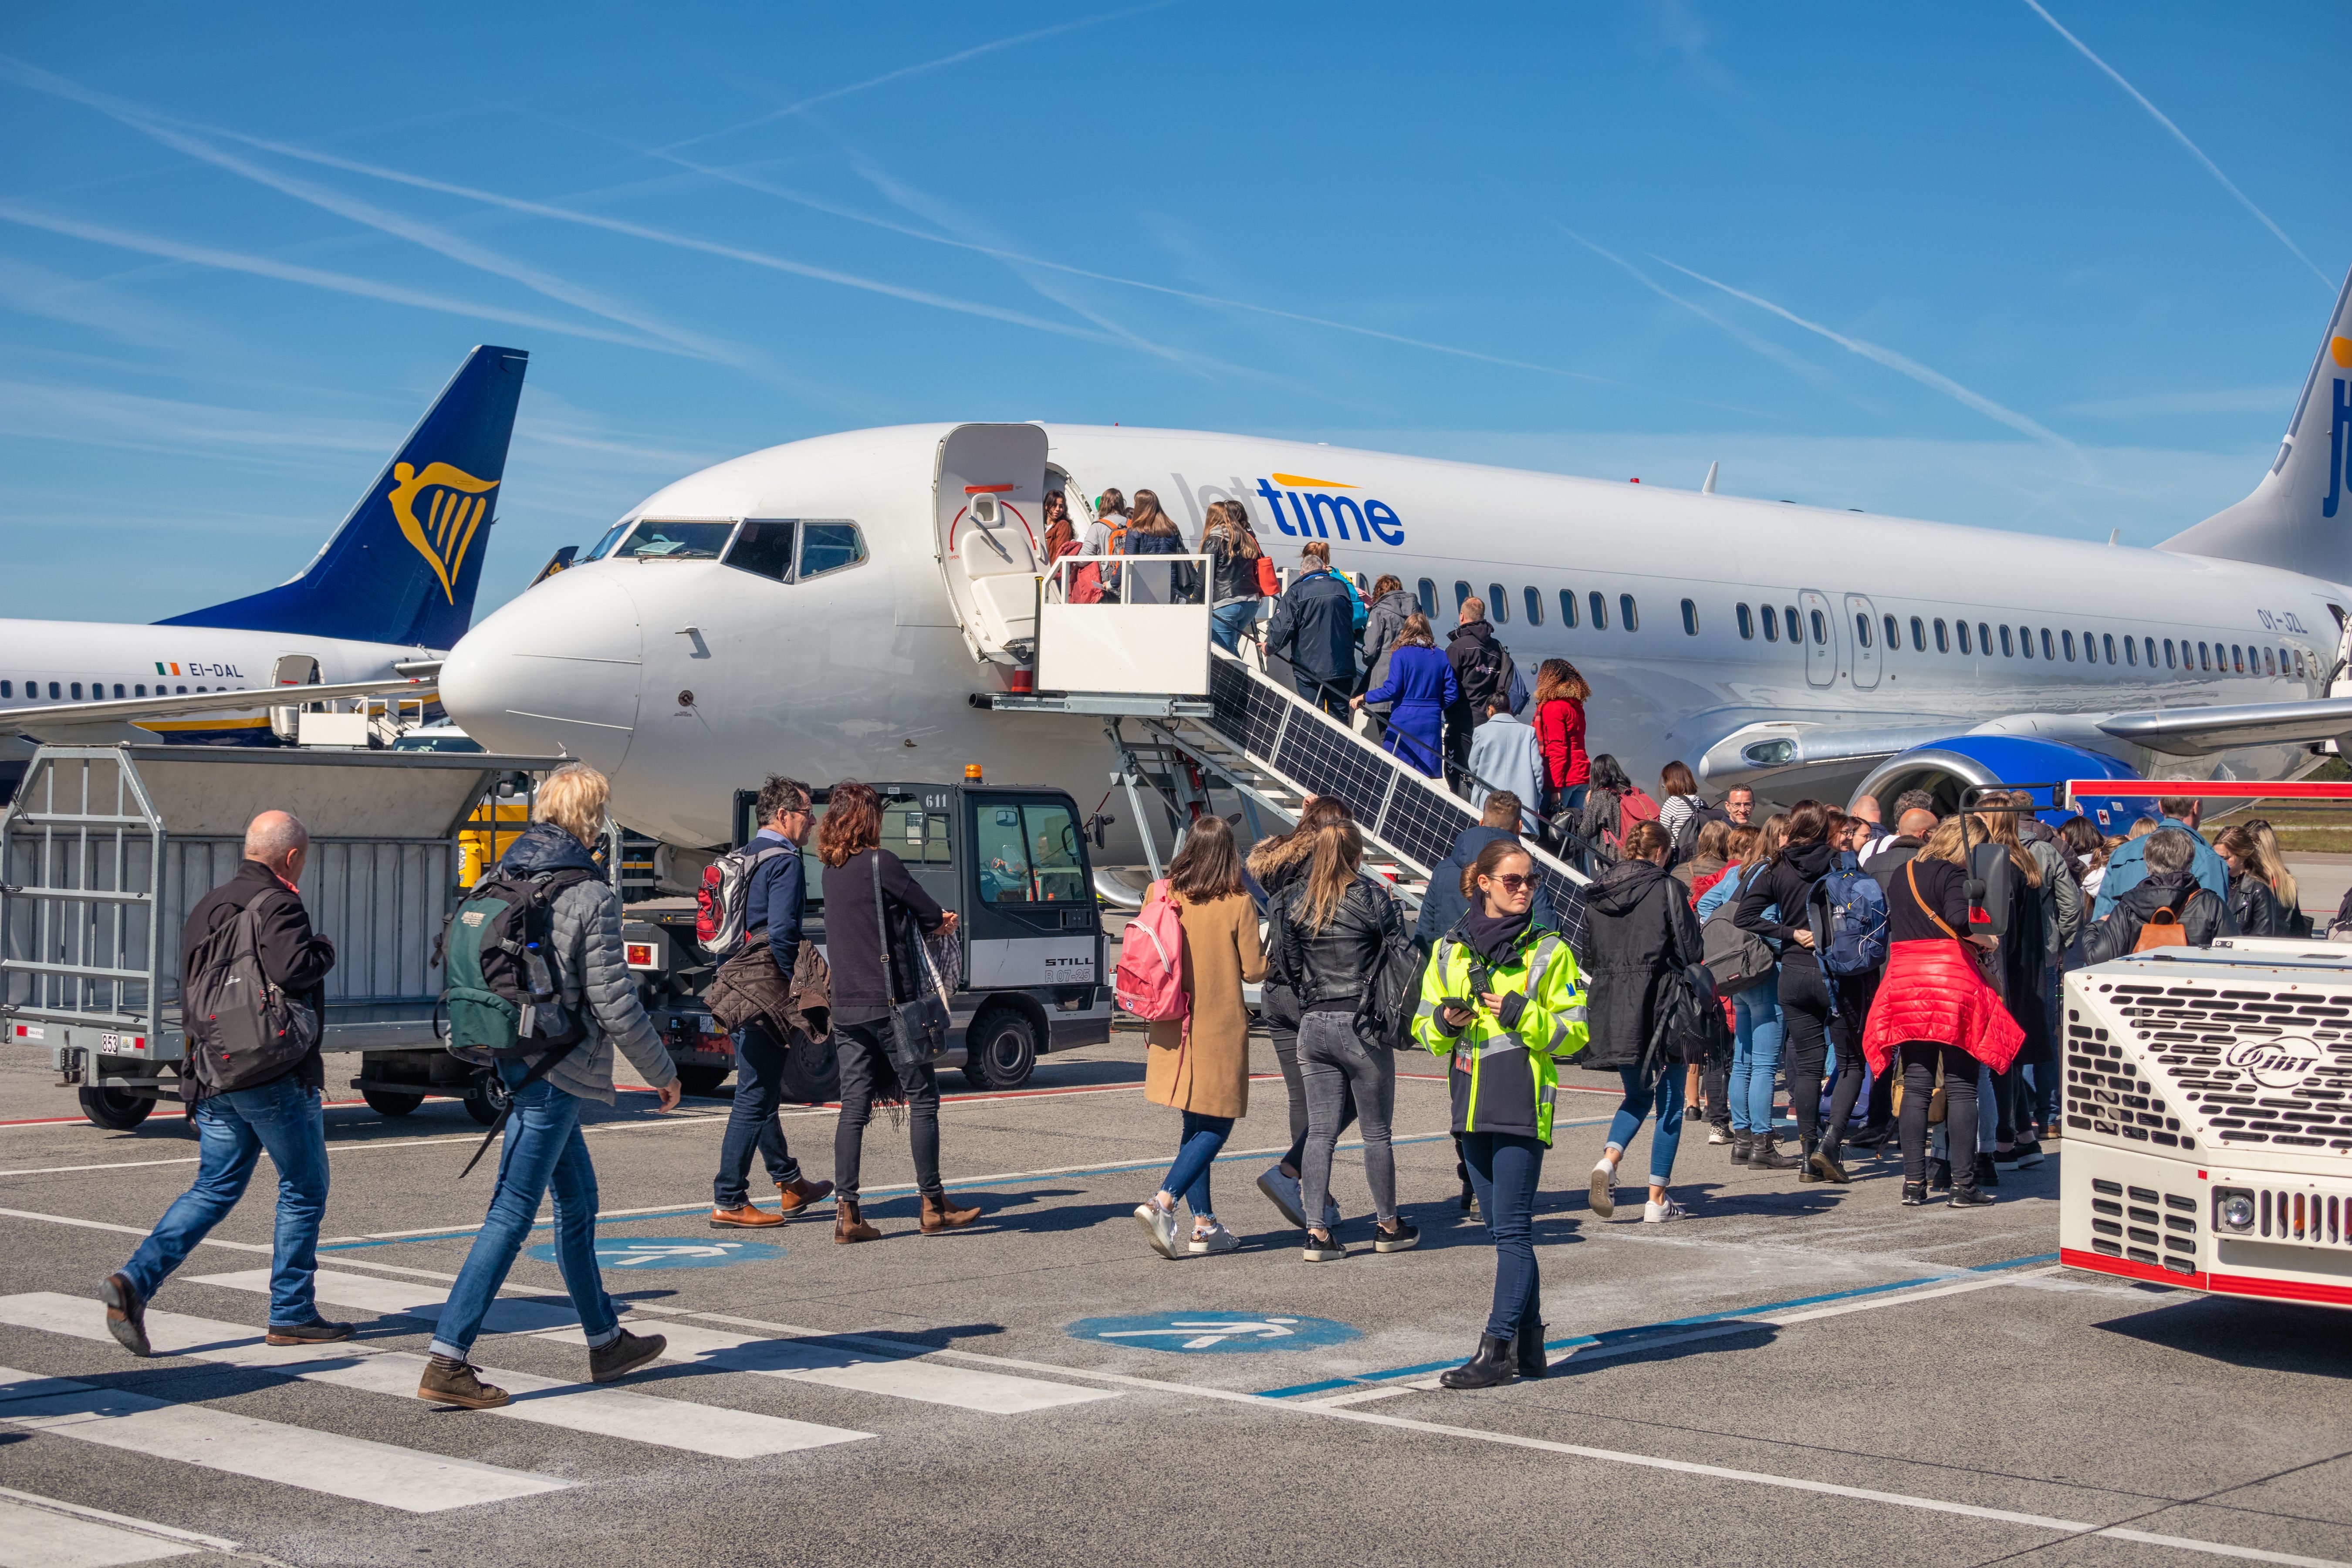 Travelers entering an airplane ready for departure at Eindhoven airport.